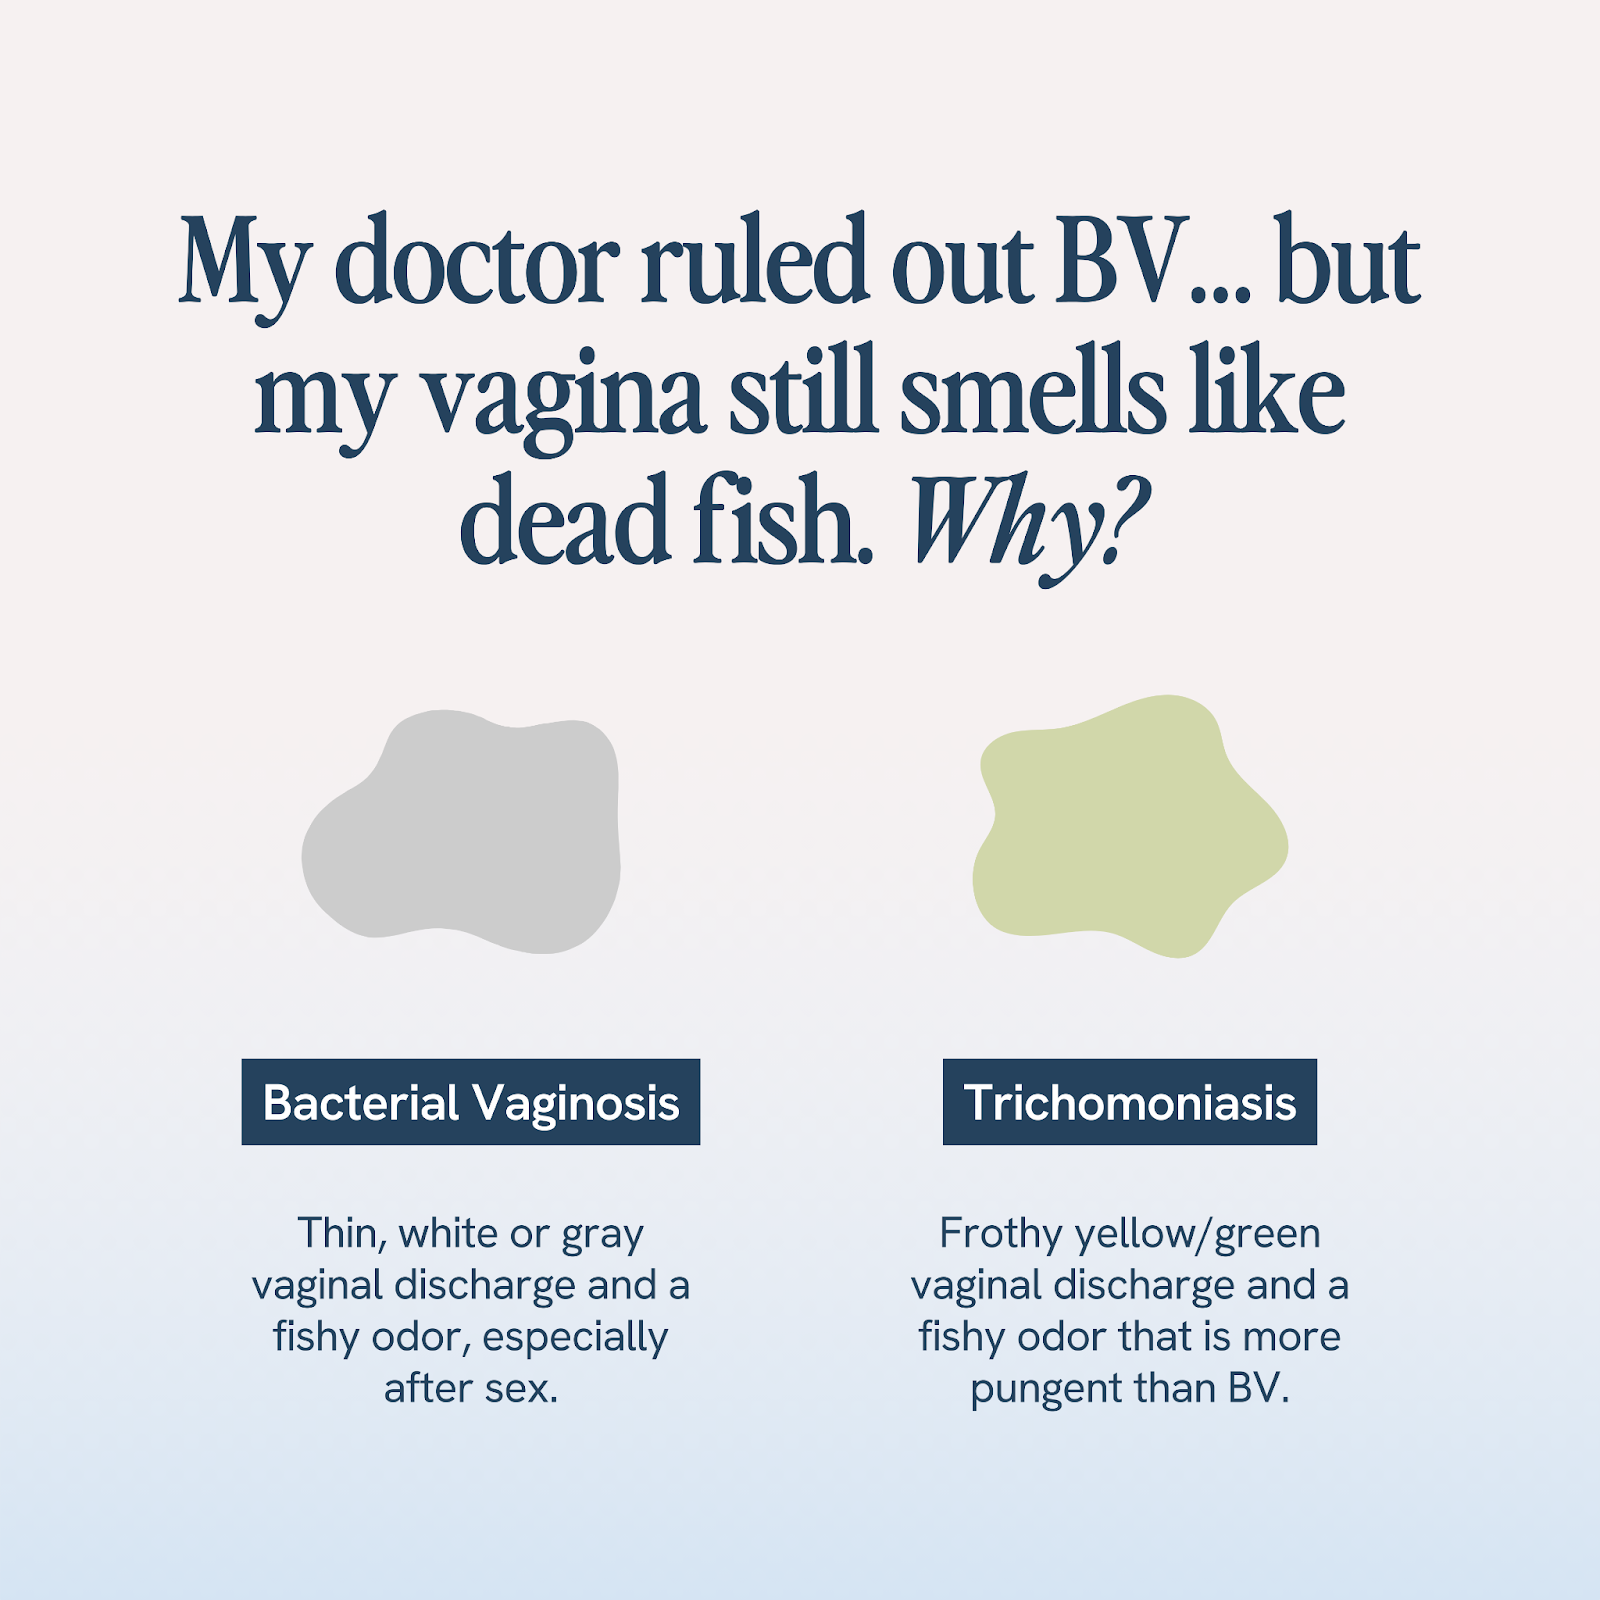 Health graphic titled 'My doctor ruled out BV... but my vagina still smells like dead fish. Why?' with two contrasting colored blobs highlighting 'Bacterial Vaginosis' with symptoms of thin, white or gray discharge and fishy odor, and 'Trichomoniasis' with symptoms of frothy yellow/green discharge with a stronger fishy odor